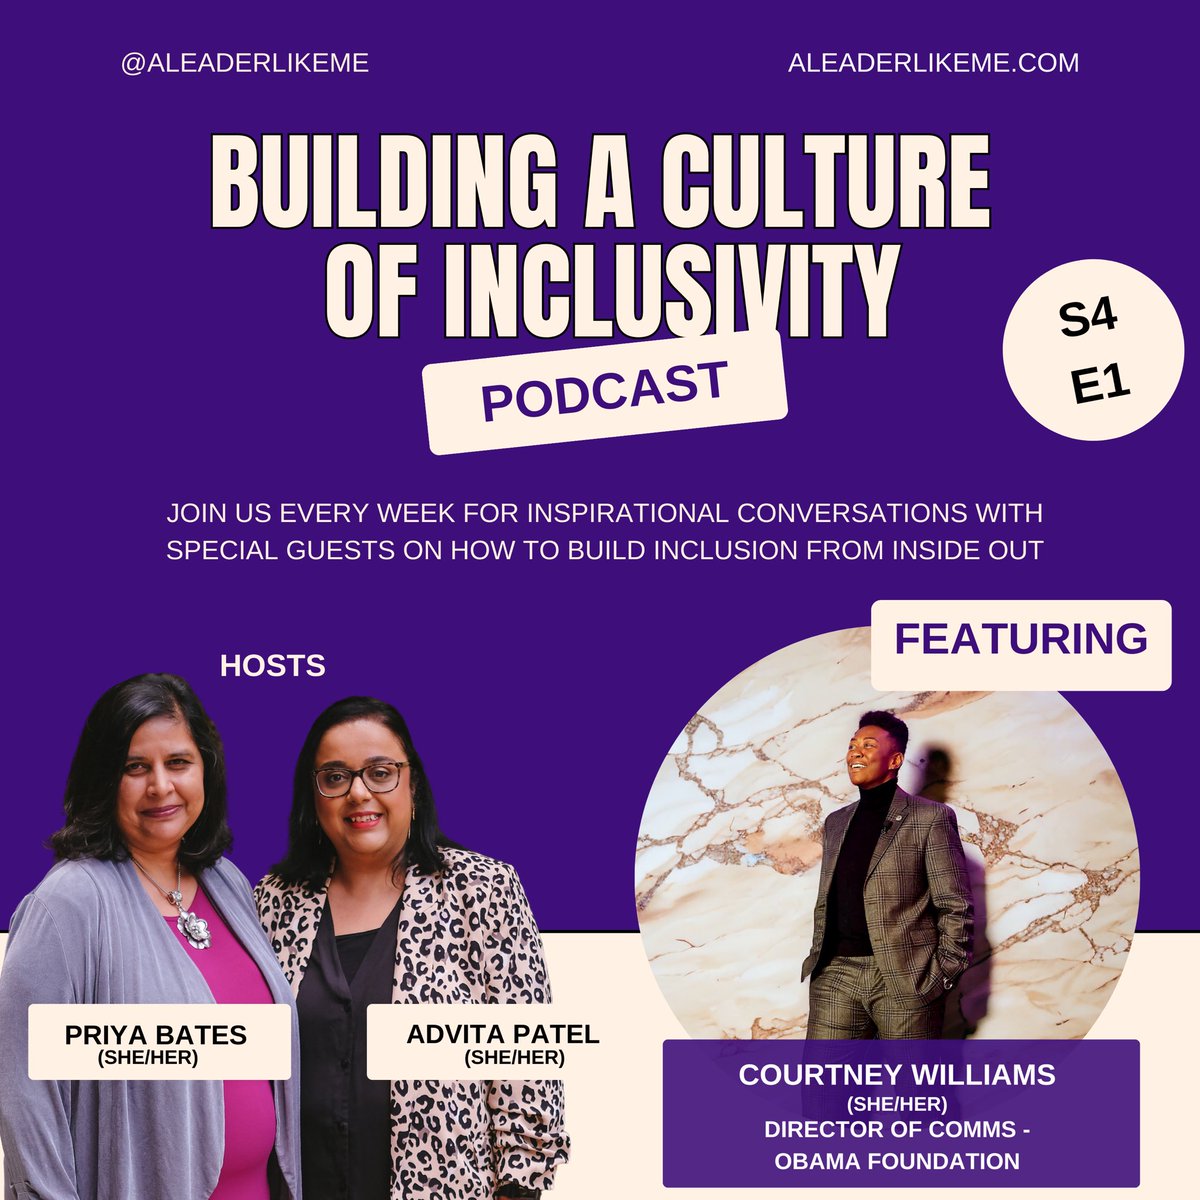 A new @ALeaderLikeMe Building a Culture of Inclusivity podcast episode launched today with Courtney Williams, Director of Comms for the @ObamaFoundation - it’s a not to be missed conversation: open.spotify.com/episode/2xkMK9…